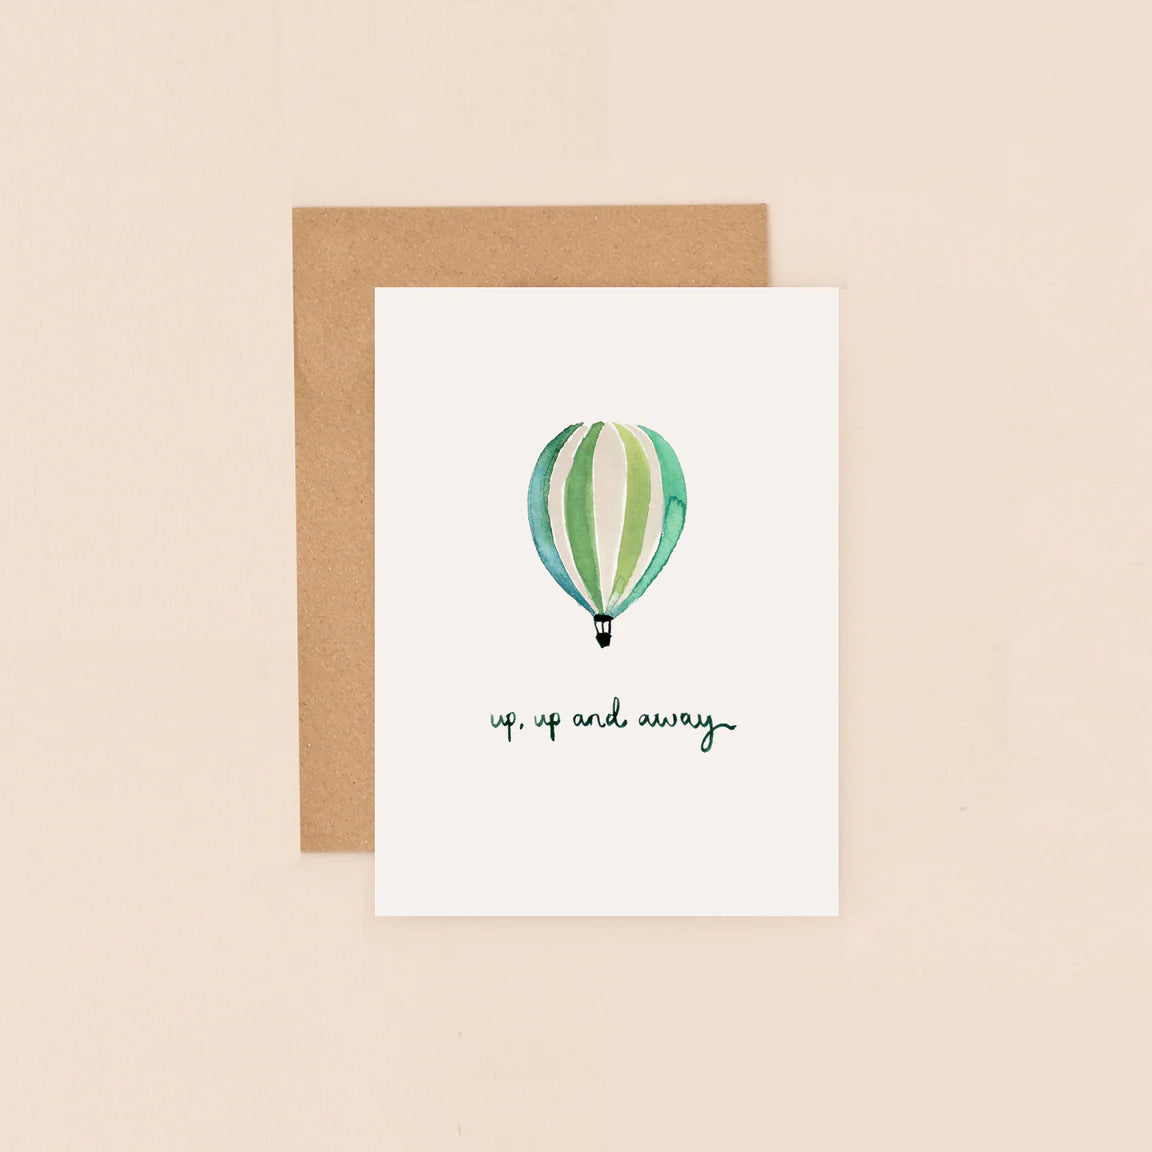 Fabulous Greeting Cards Louise Mulgrew Mini Card  Hot Air Balloon Up And Away Card by Weirs of Baggot Street